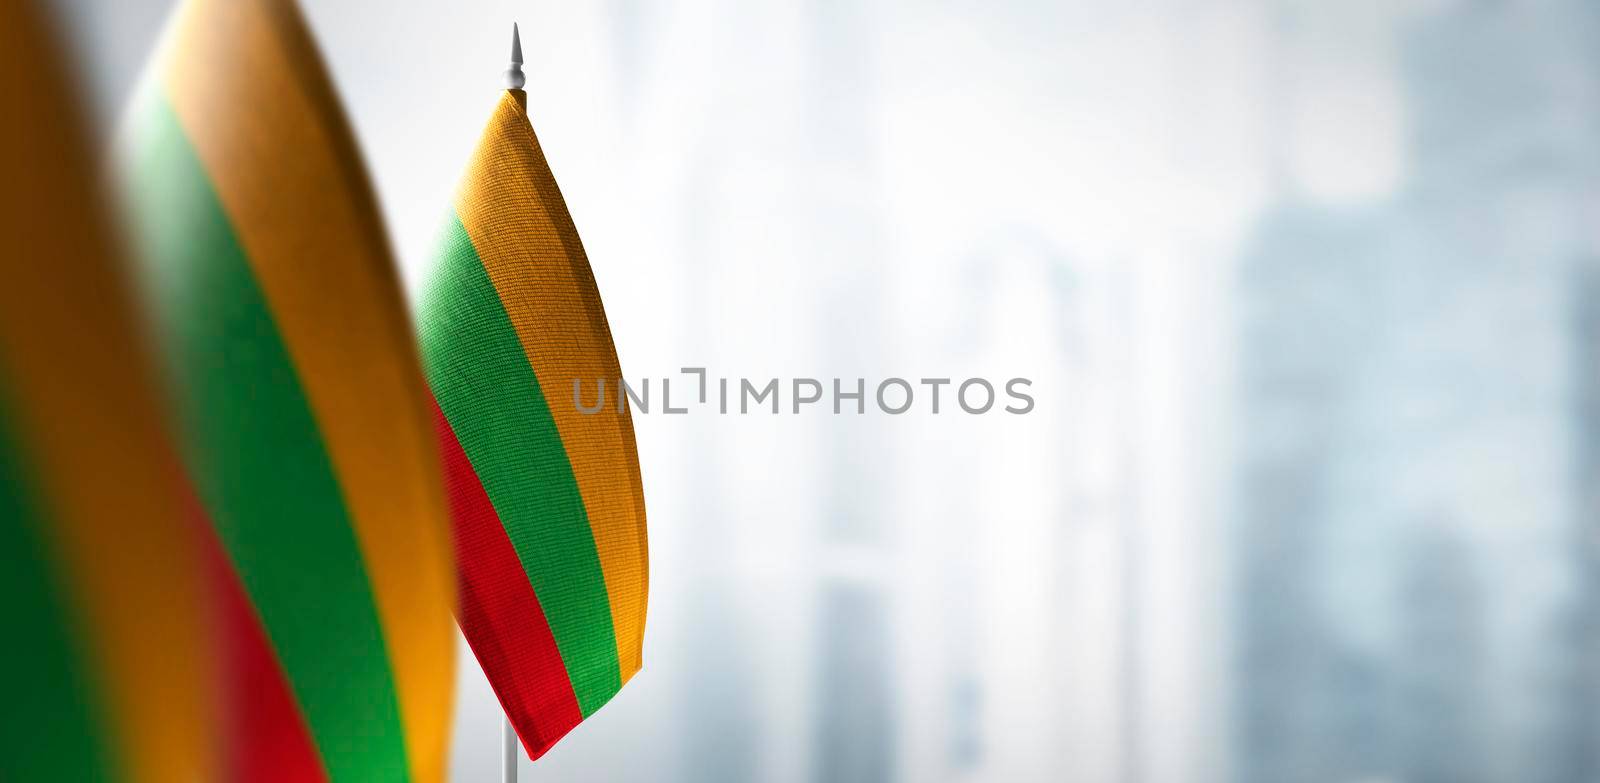 Small flags of Lithuania on the background of an urban abstract blurred background.